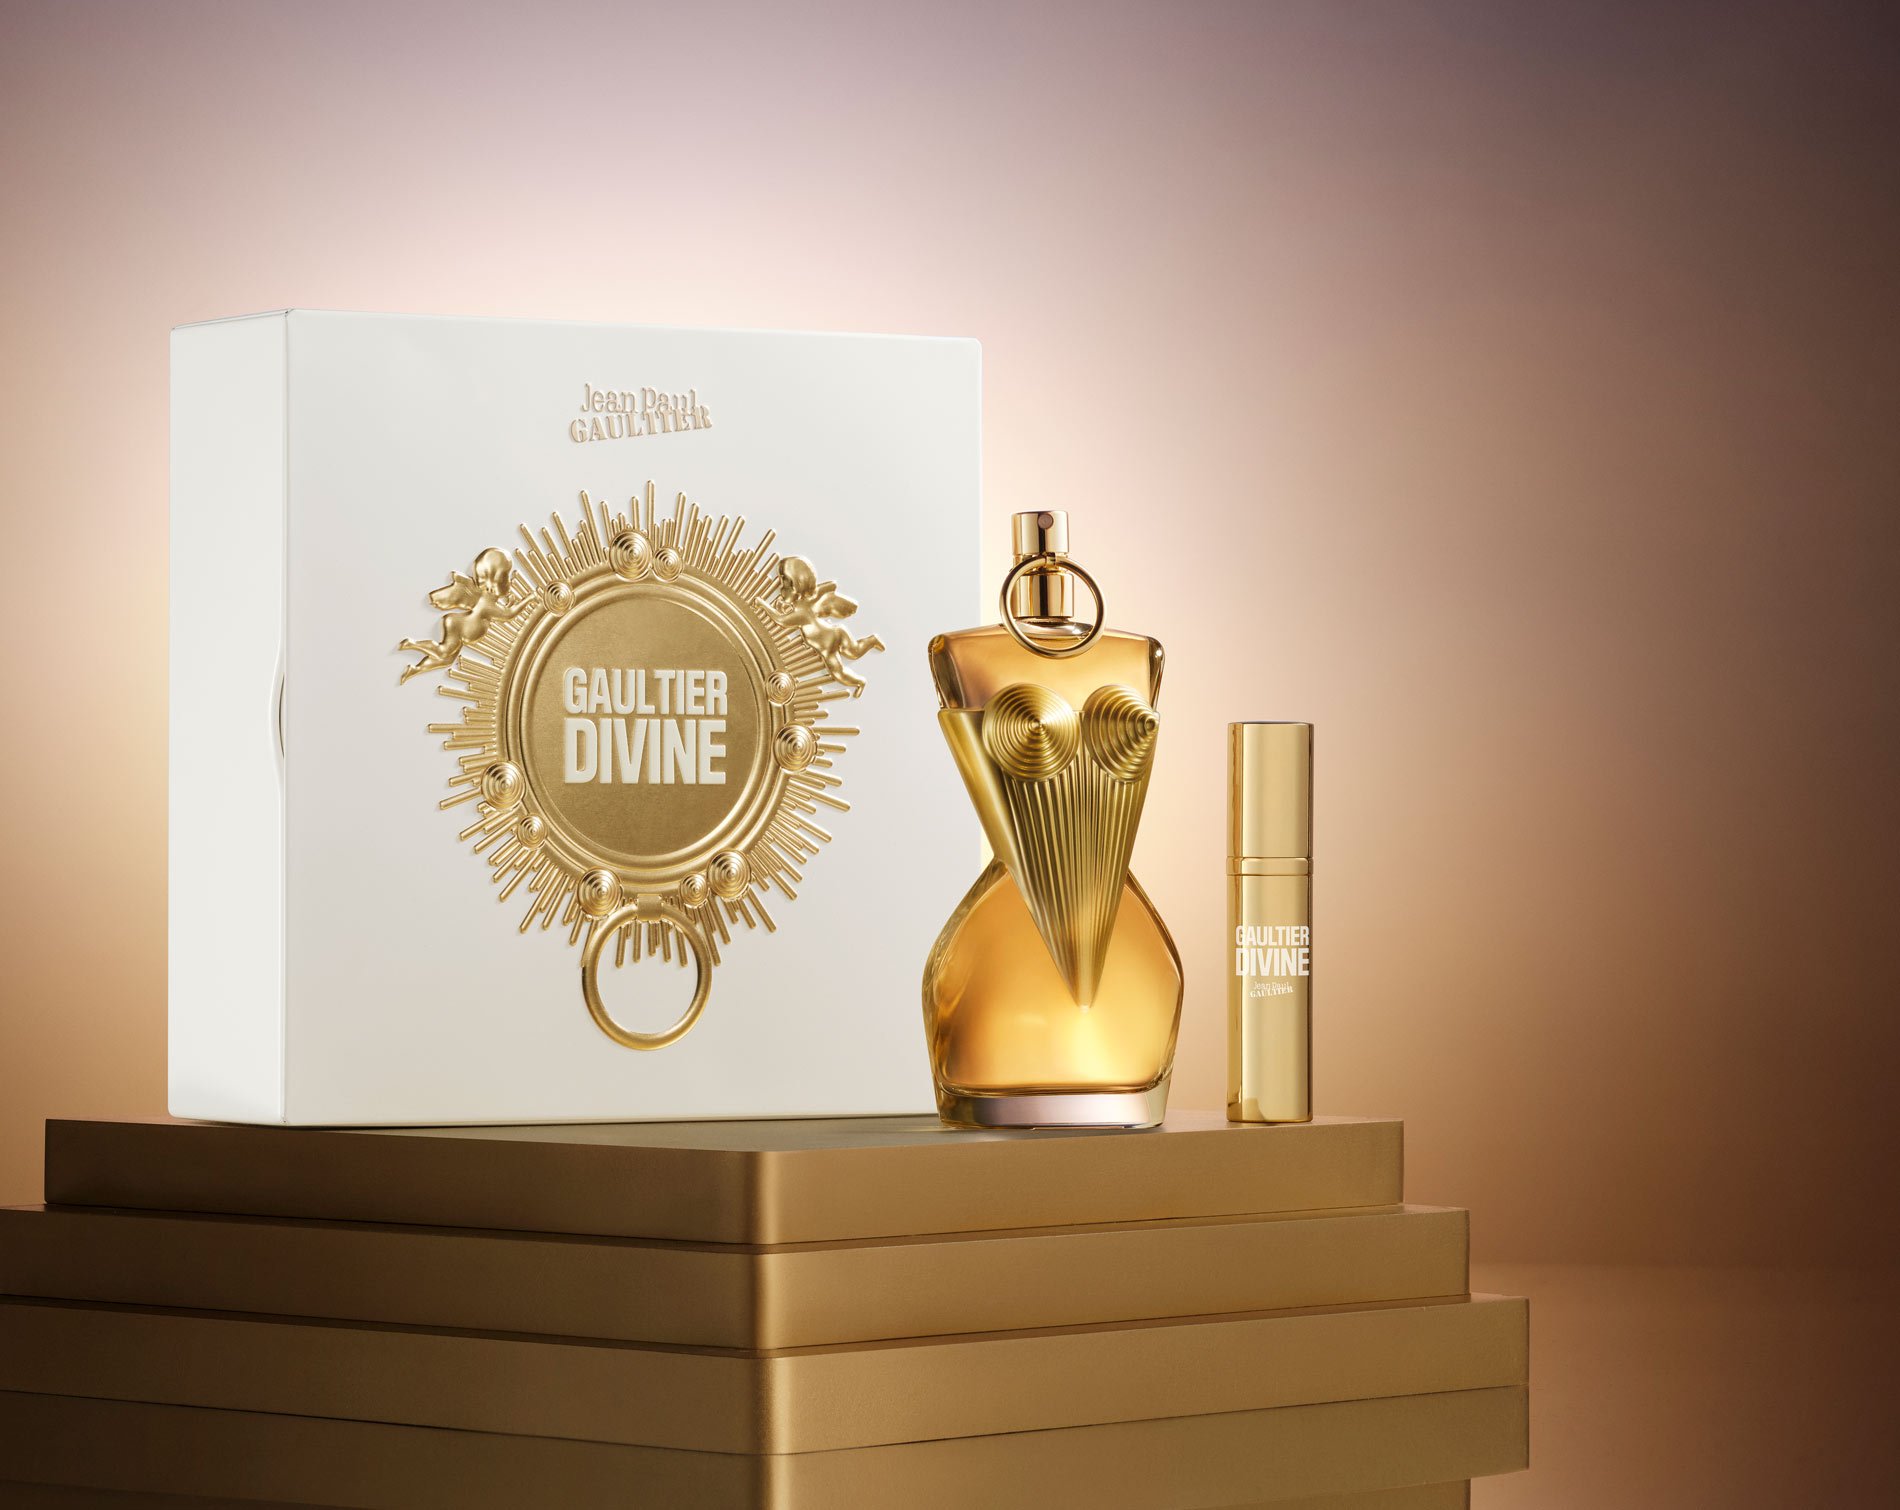 Gaultier Divine gift set still life with gold background